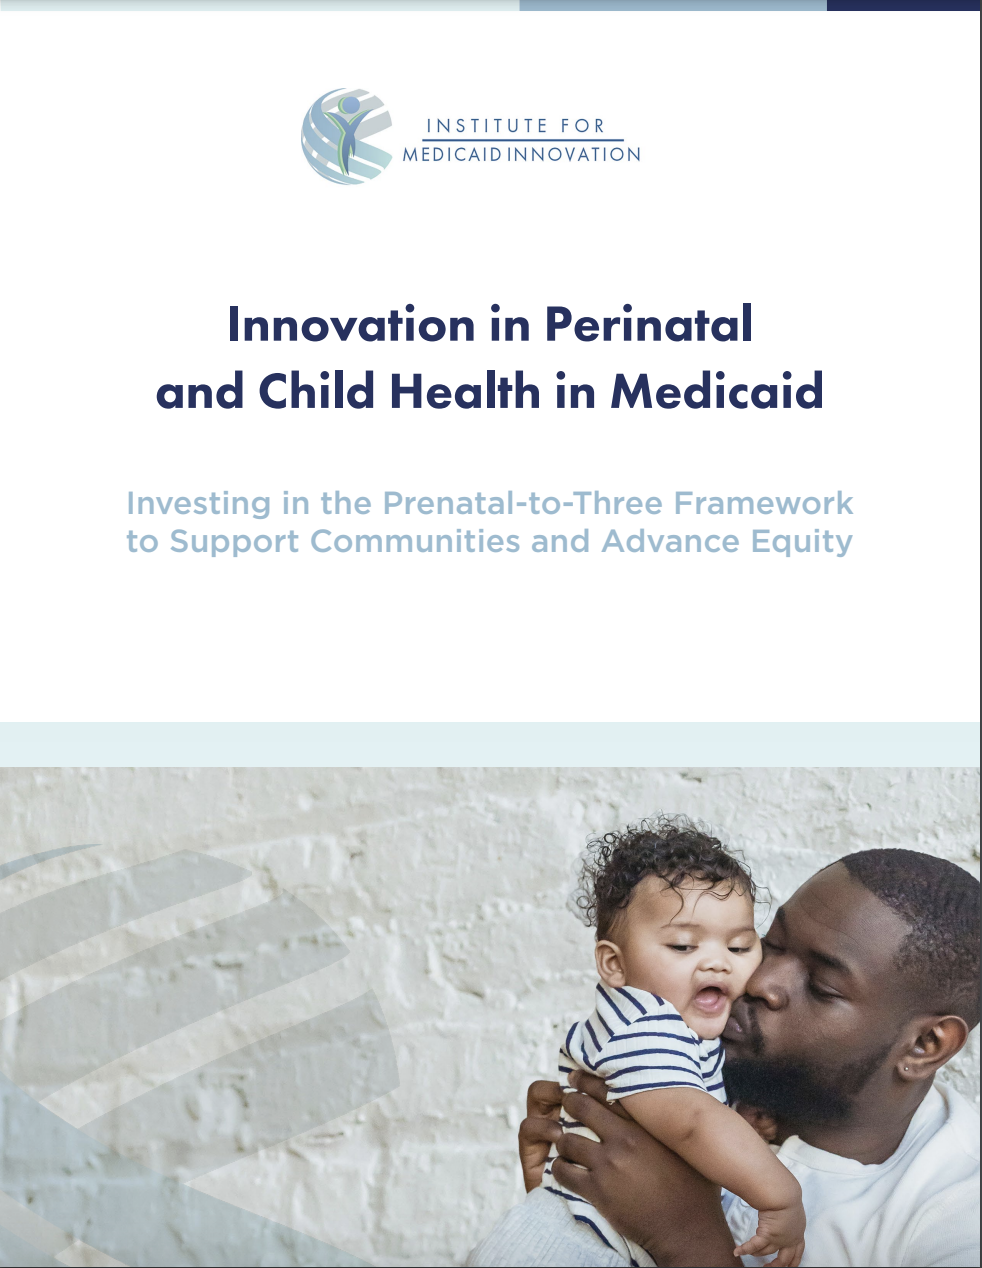 Innovation in Perinatal and Child Health in Medicaid Report